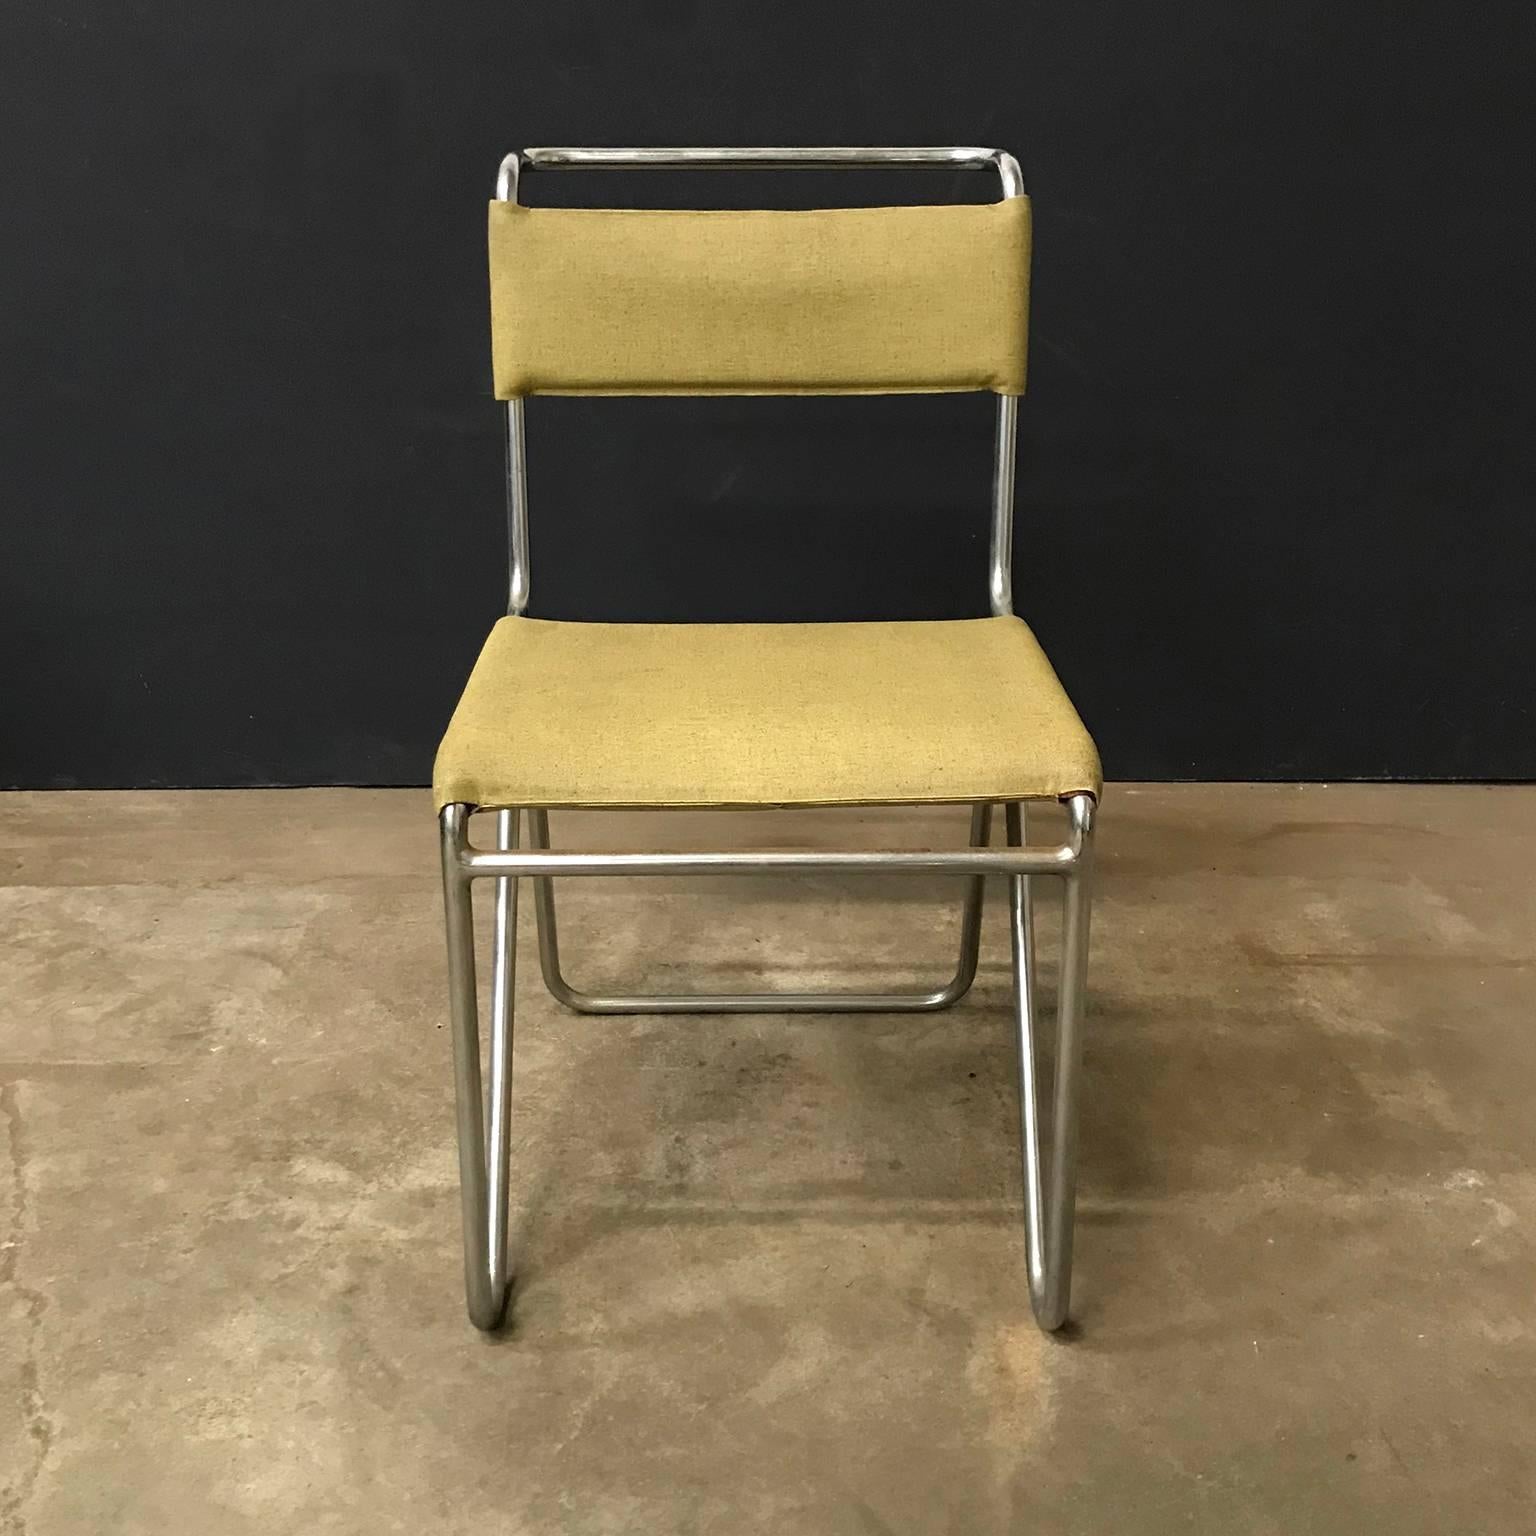 1927, W.H. Gispen for Gispen, Diagonal Chair 102 in Original Yellow Faux Leather In Good Condition For Sale In Amsterdam IJMuiden, NL